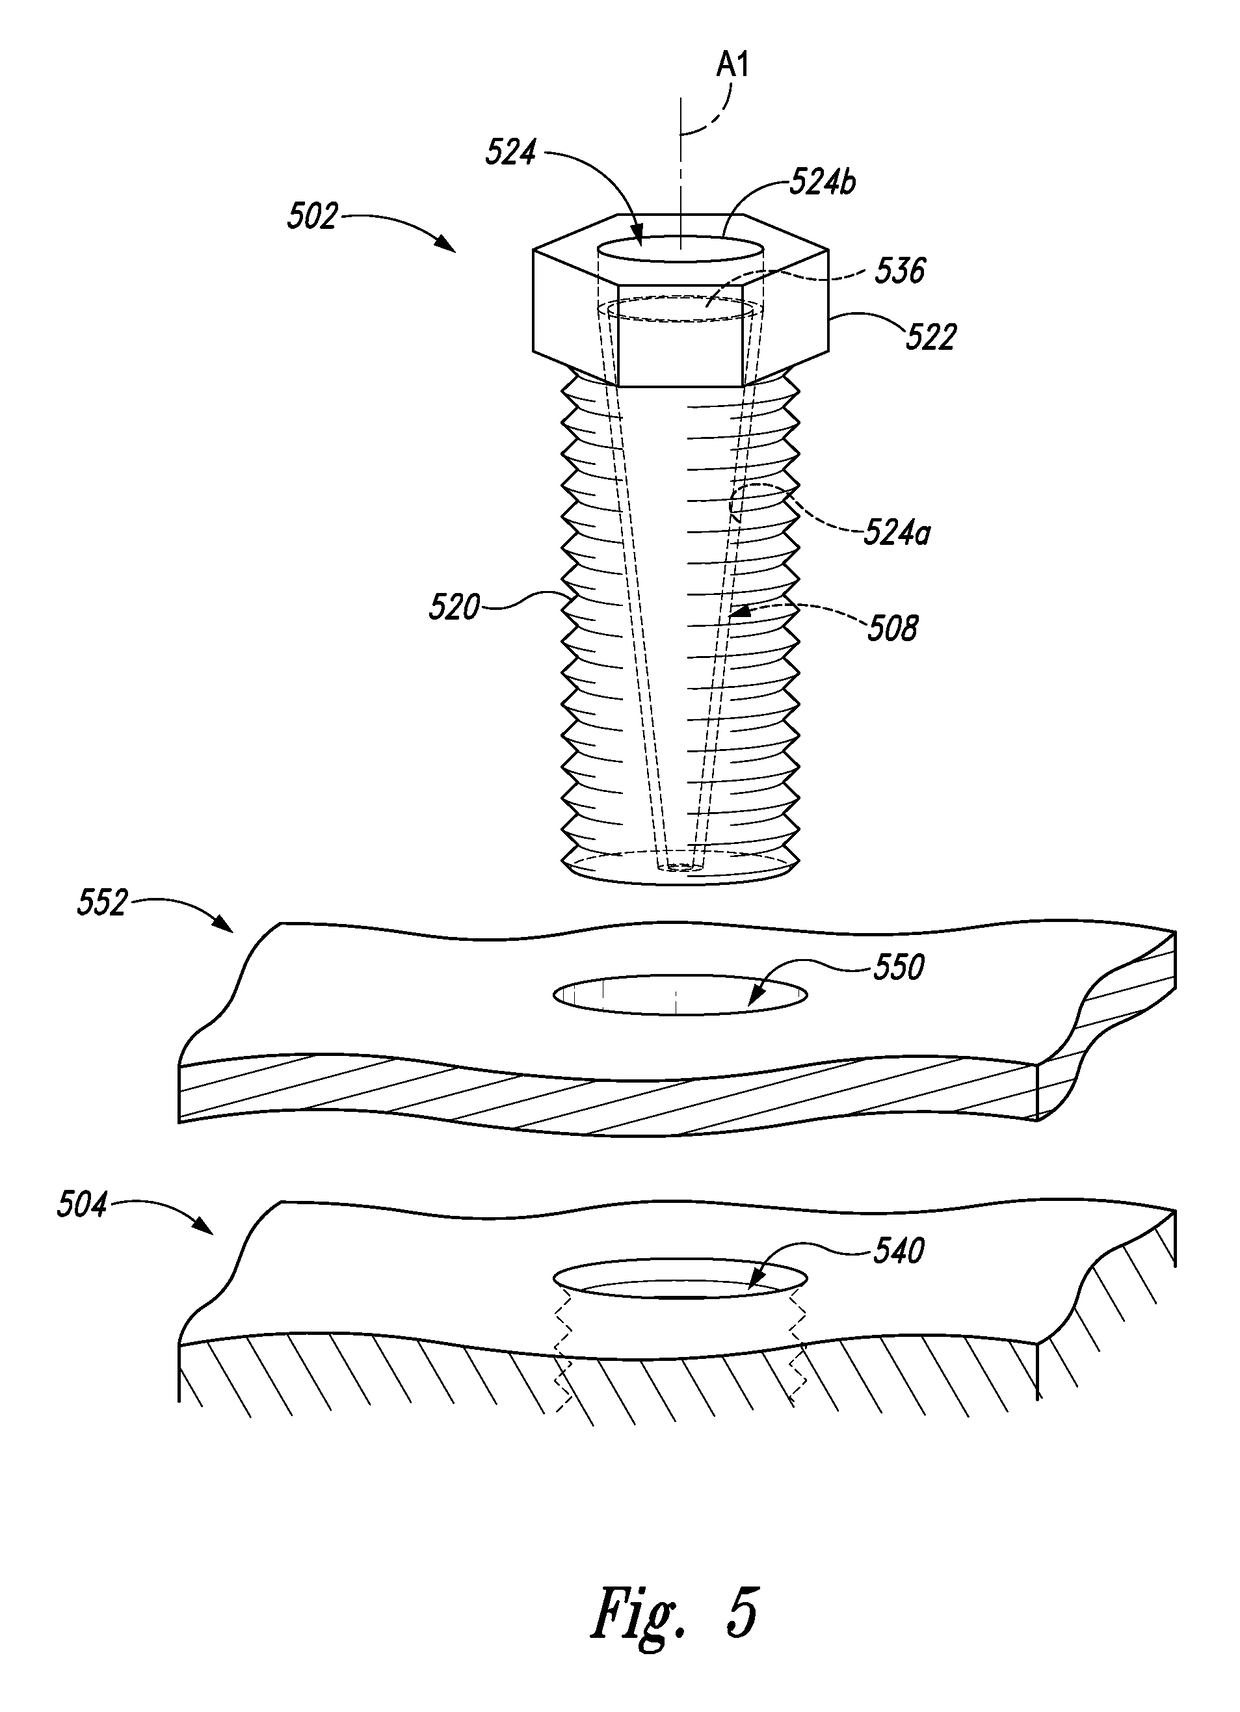 Witness enabled fasteners and related systems and methods